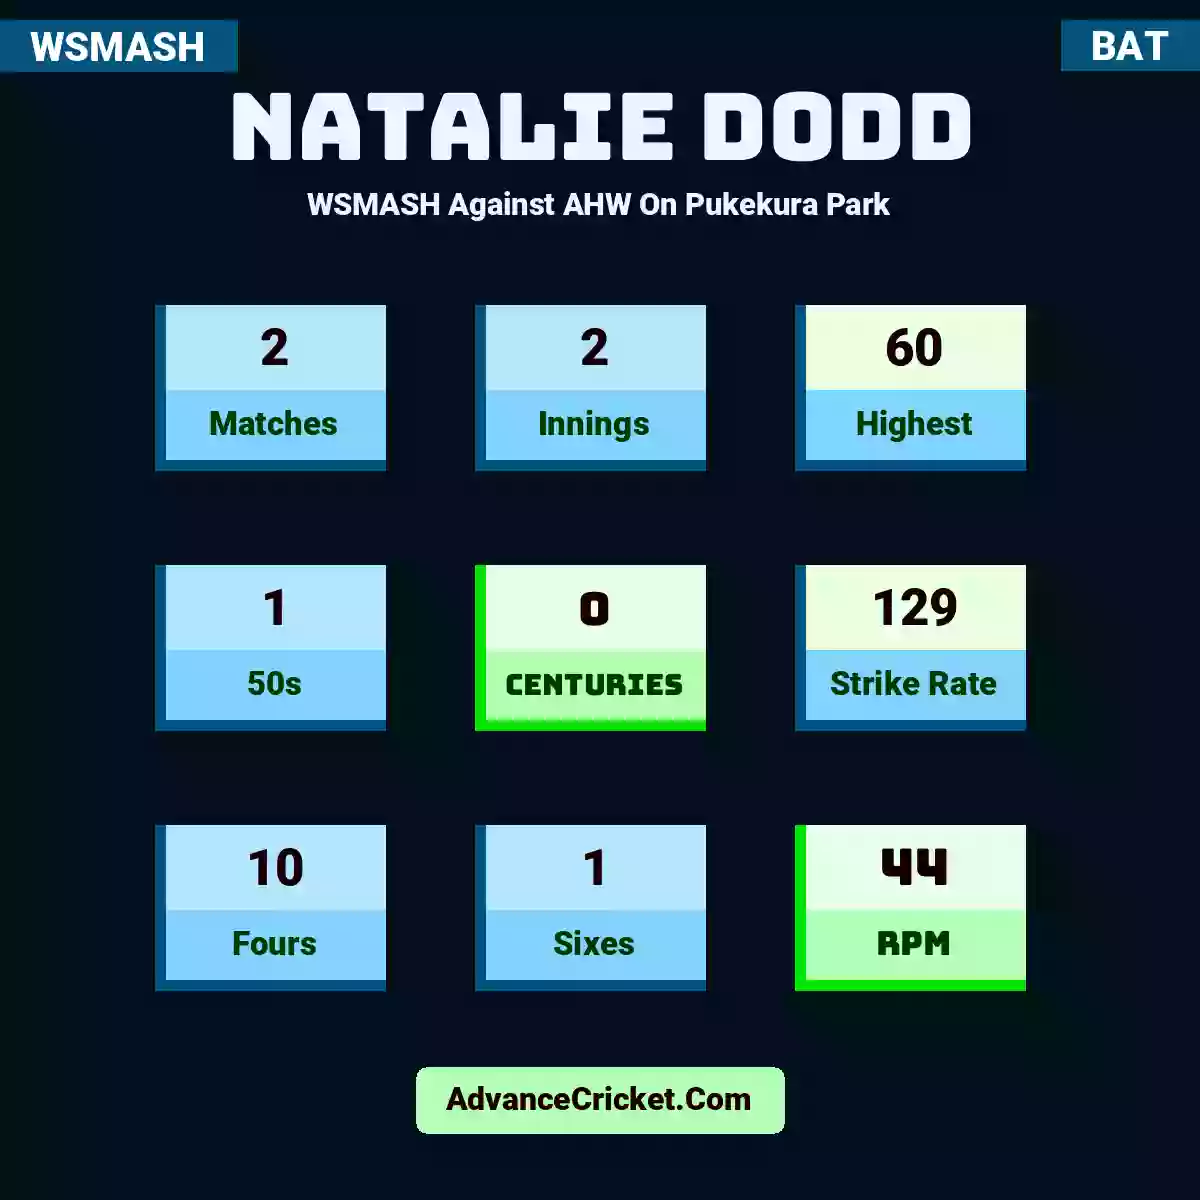 Natalie Dodd WSMASH  Against AHW On Pukekura Park, Natalie Dodd played 2 matches, scored 60 runs as highest, 1 half-centuries, and 0 centuries, with a strike rate of 129. N.Dodd hit 10 fours and 1 sixes, with an RPM of 44.